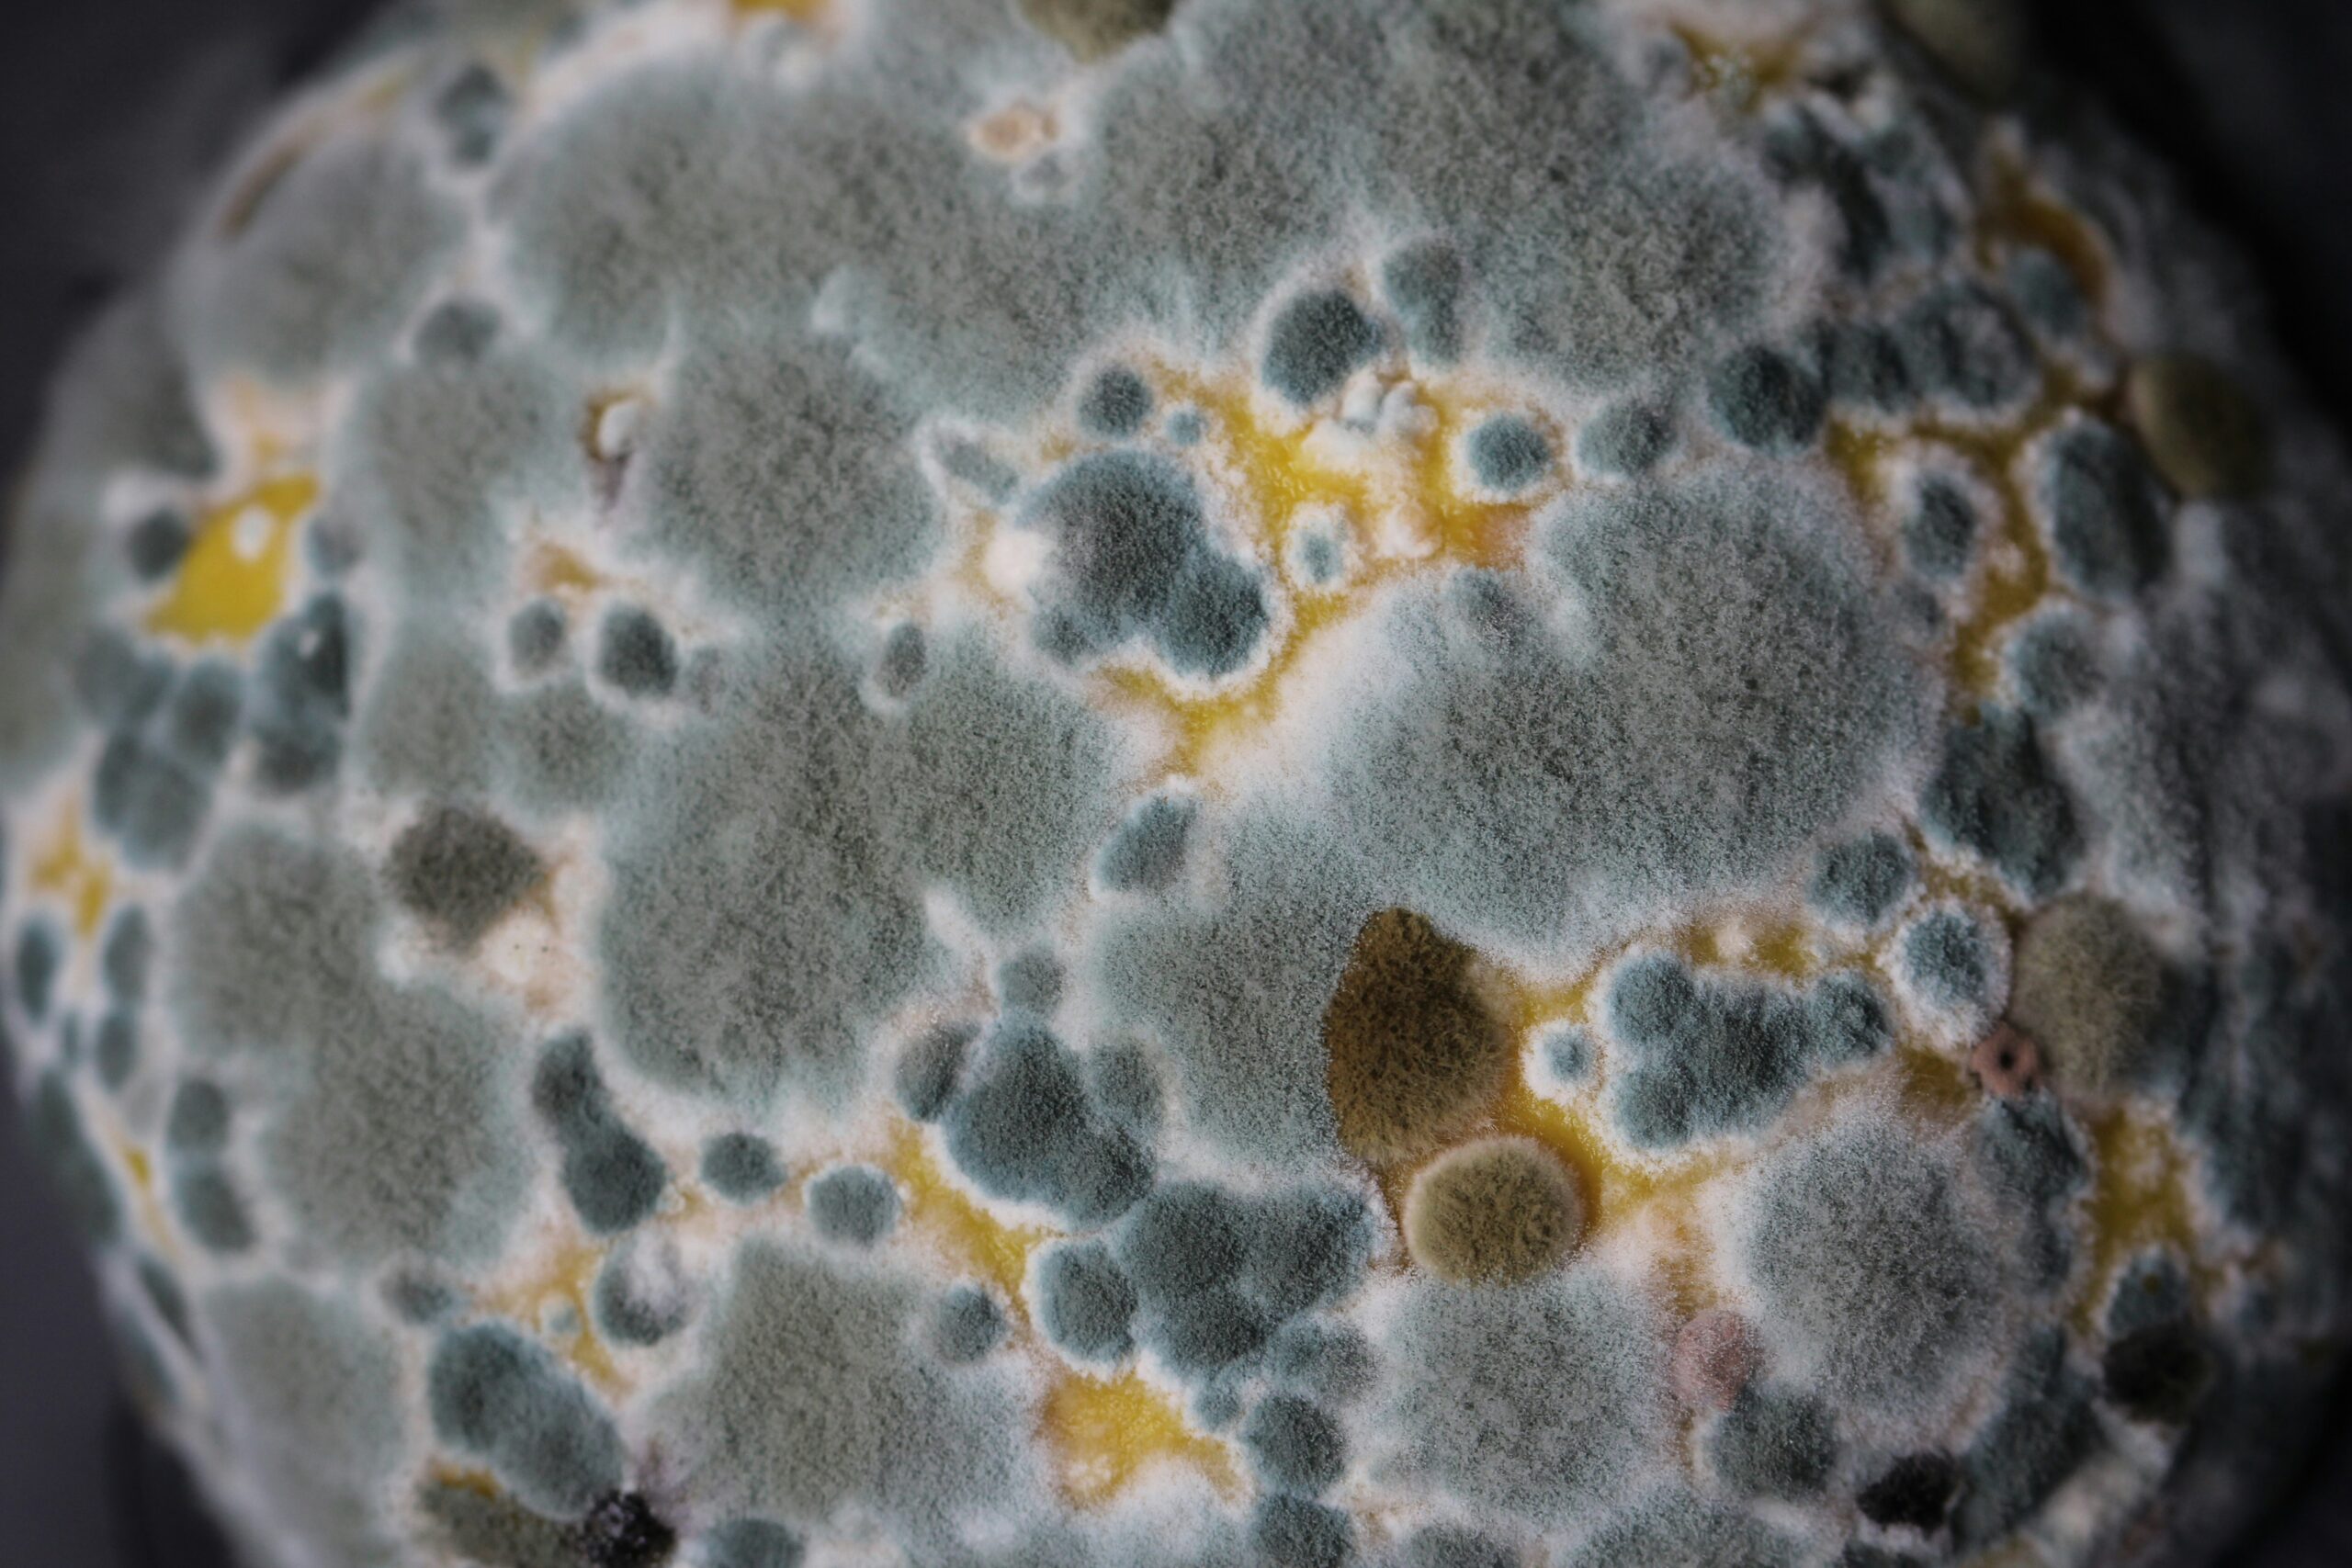 Close-up image of various colored mold spores indicating potential toxicity